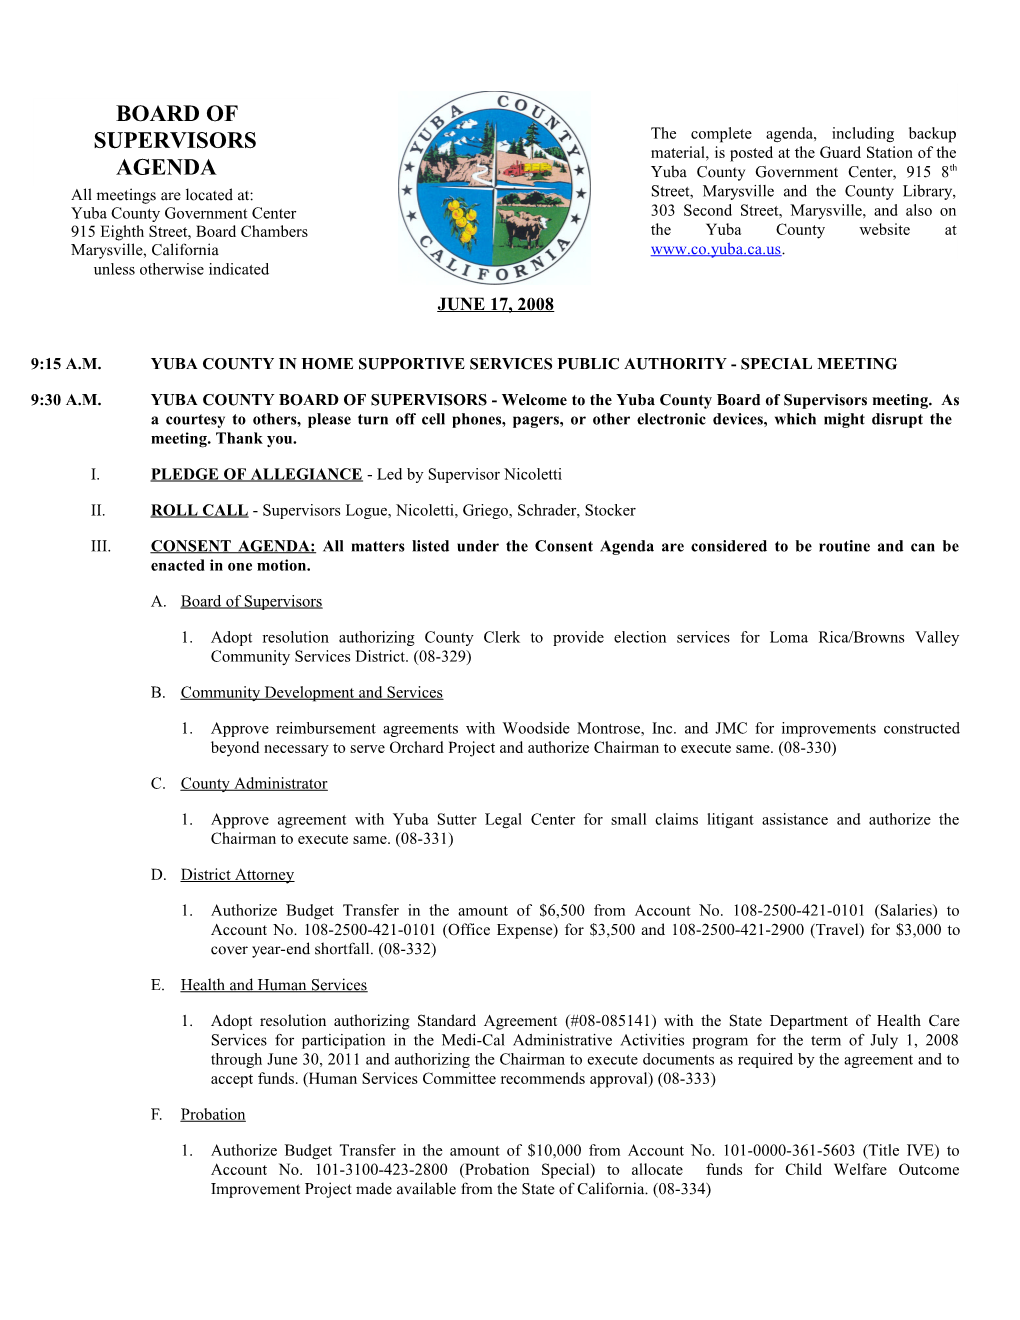 9:15 A.M.Yuba County in Home Supportive Services Public Authority - Special Meeting